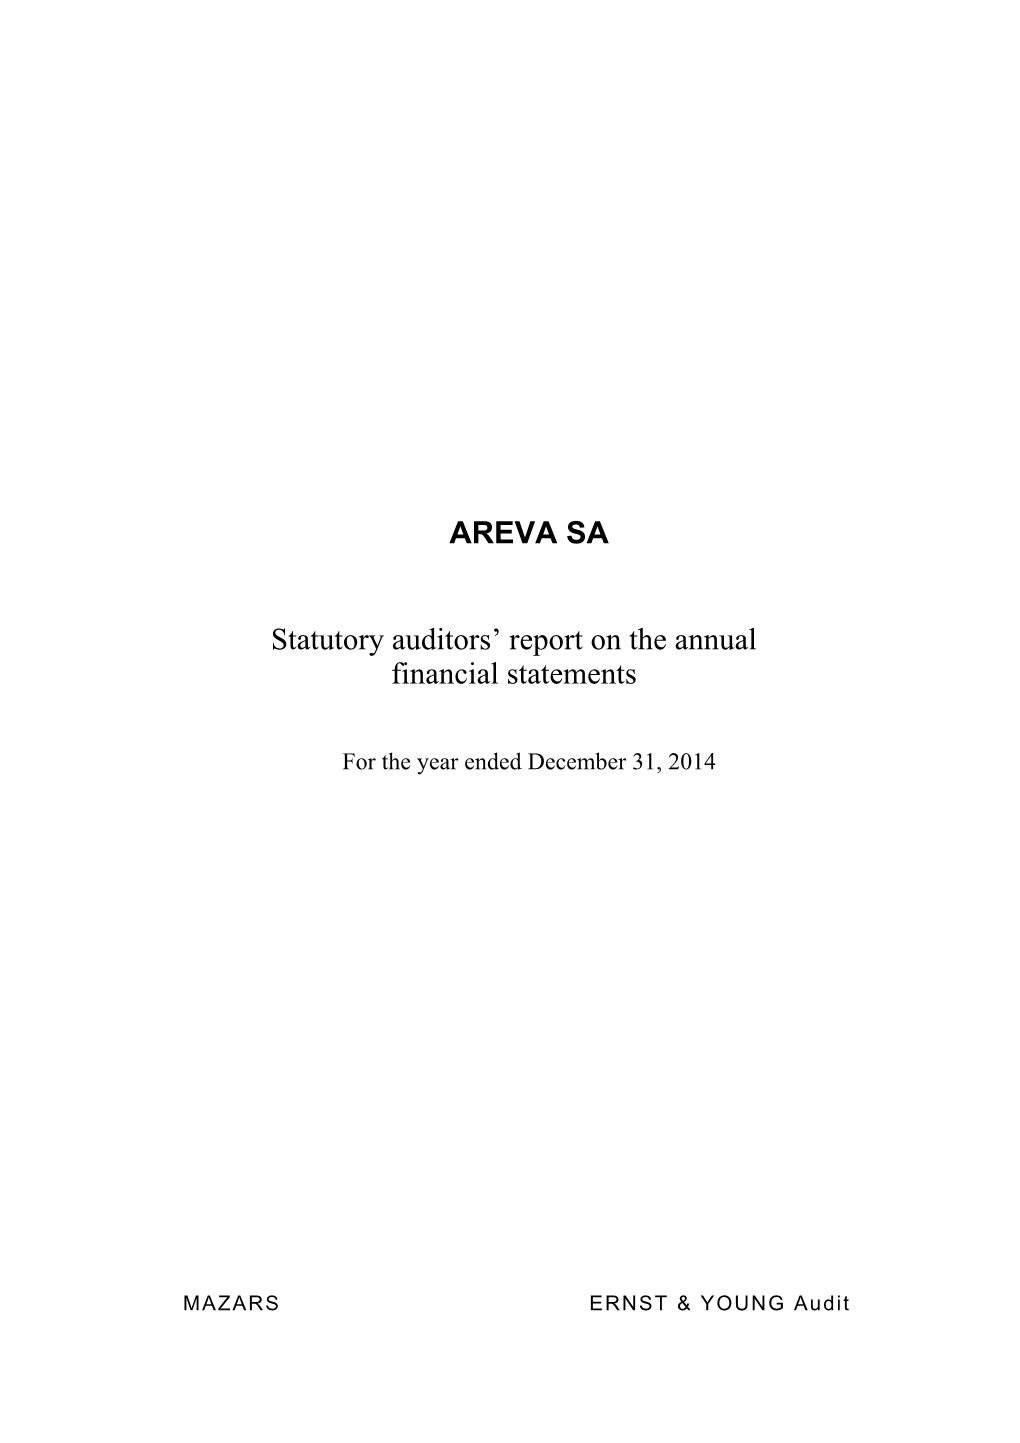 AREVA SA Statutory Auditors' Report on the Annual Financial Statements